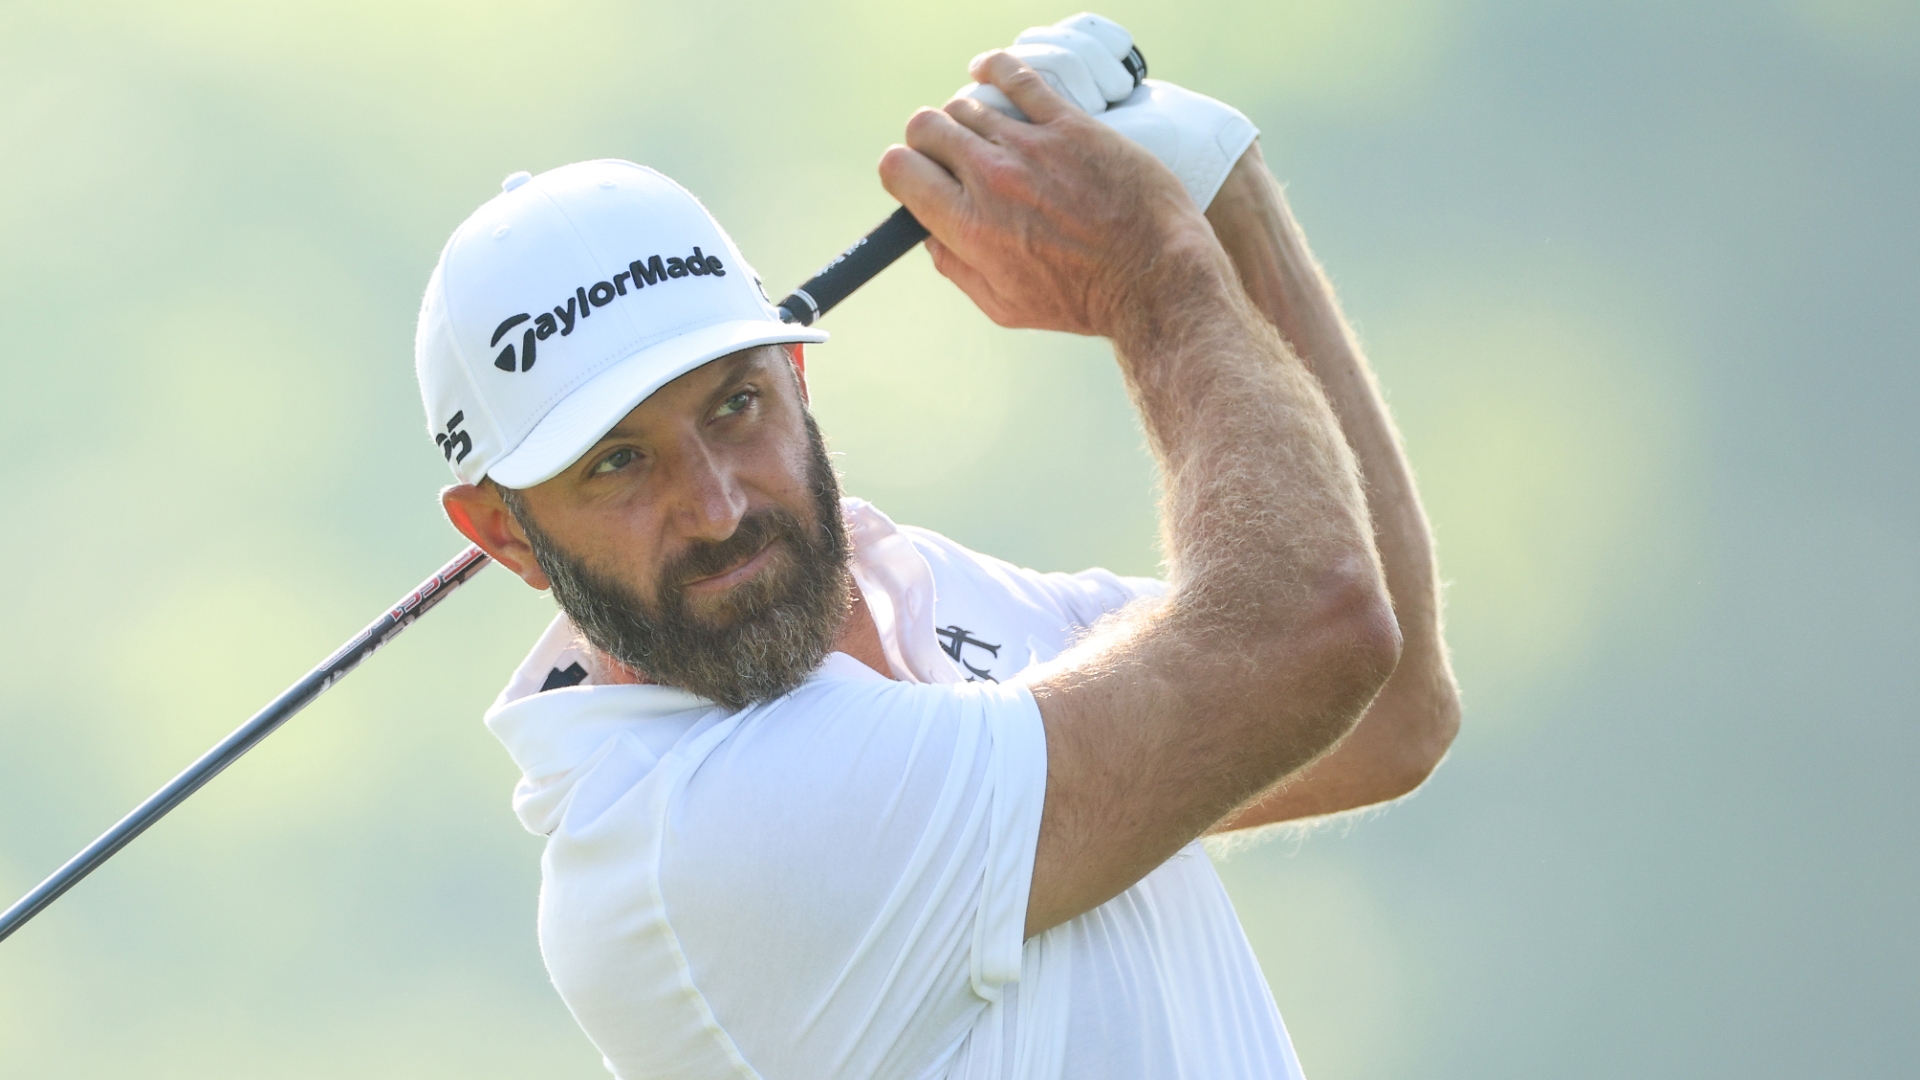 Dustin Johnson's tee shot off trees leads to double bogey